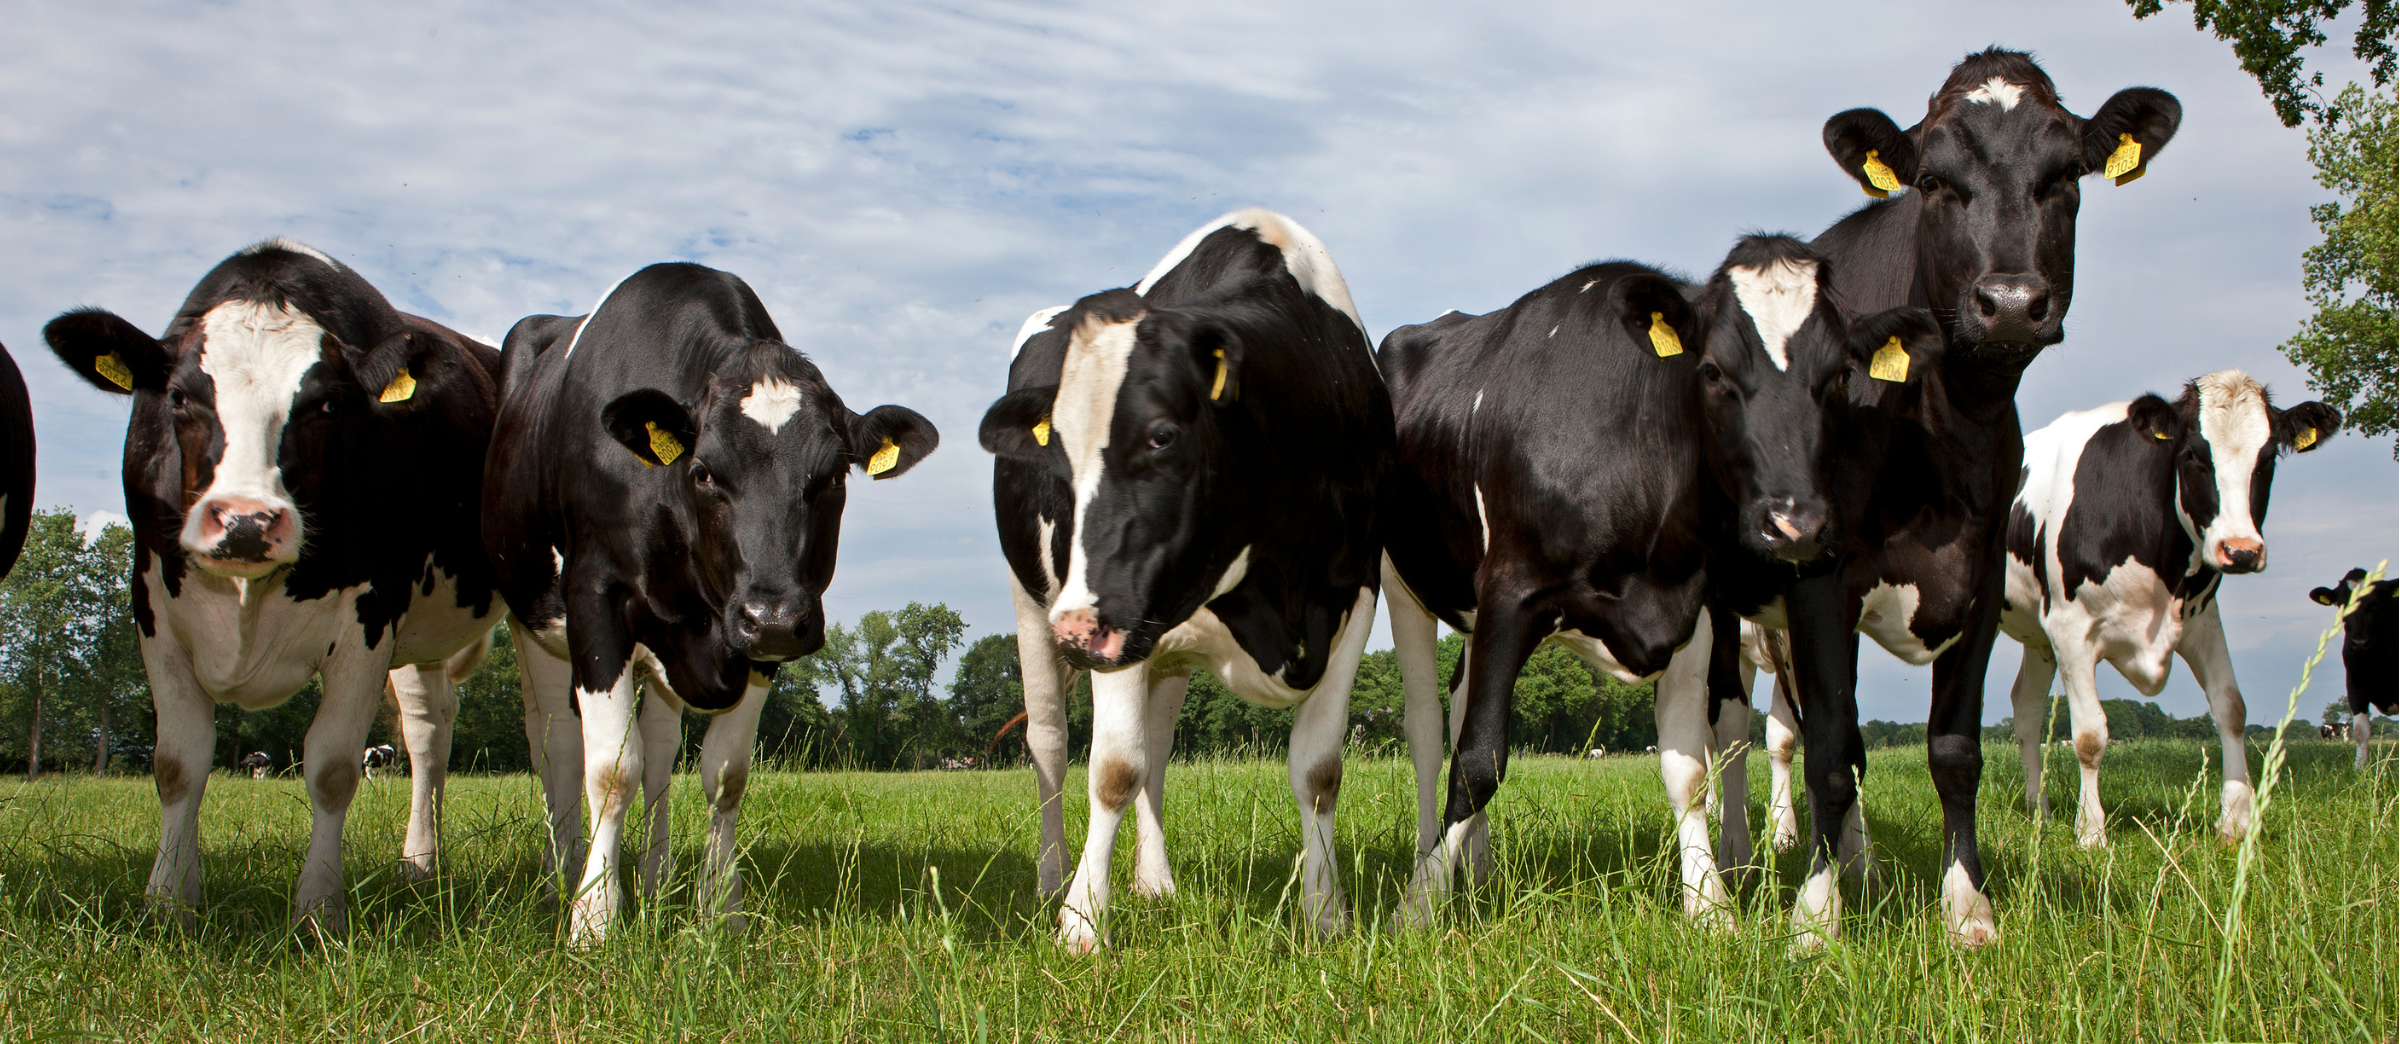 Handful of Holstein cattle in a pasture looking toward photographer